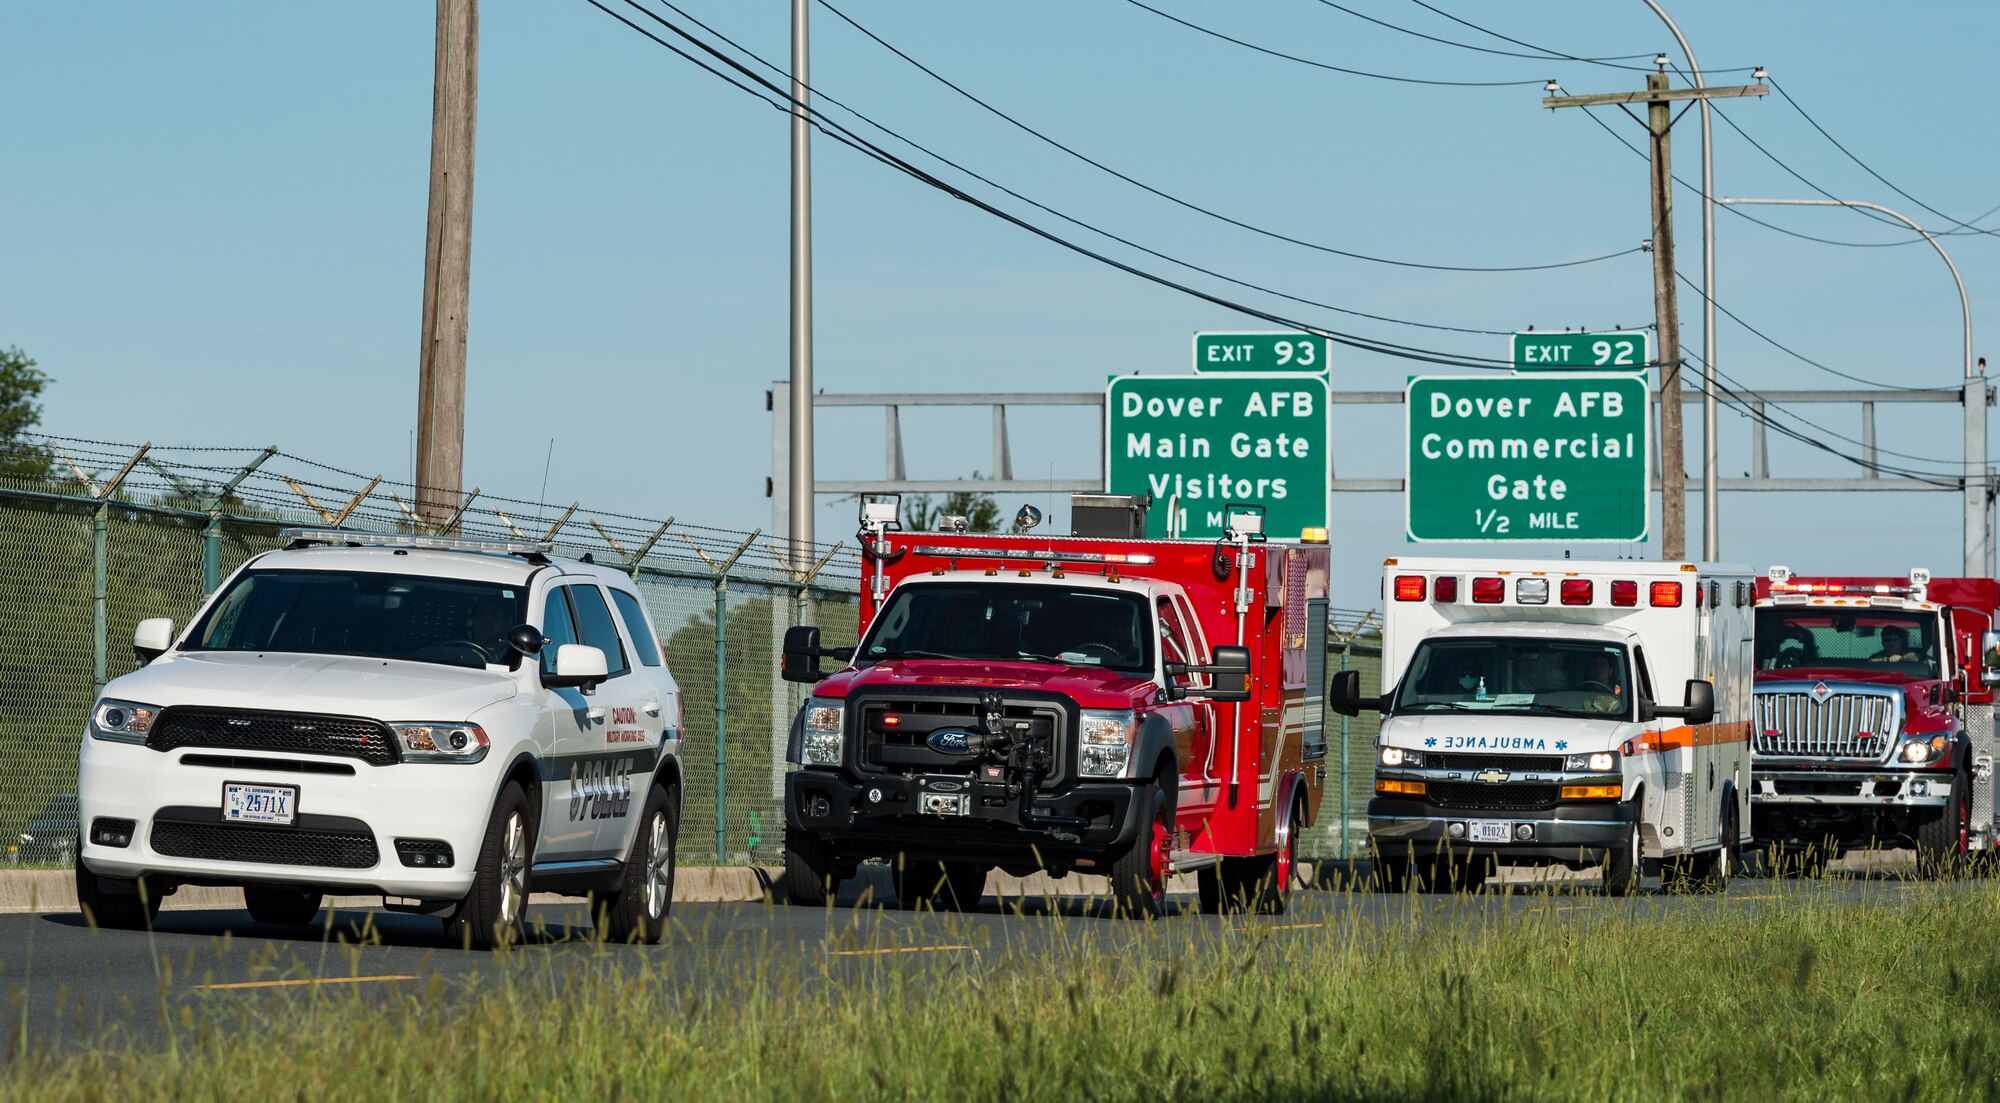 A procession of first response vehicles make their way to the Air Mobility Command Museum’s 9/11 Memorial on Dover Air Force Base, Delaware, Sept. 11, 2021. The base hosted a 20th Anniversary 9/11 Remembrance Ceremony to remember and honor those who perished in the attacks on Sept. 11, 2001. (U.S. Air Force photo by Roland Balik)